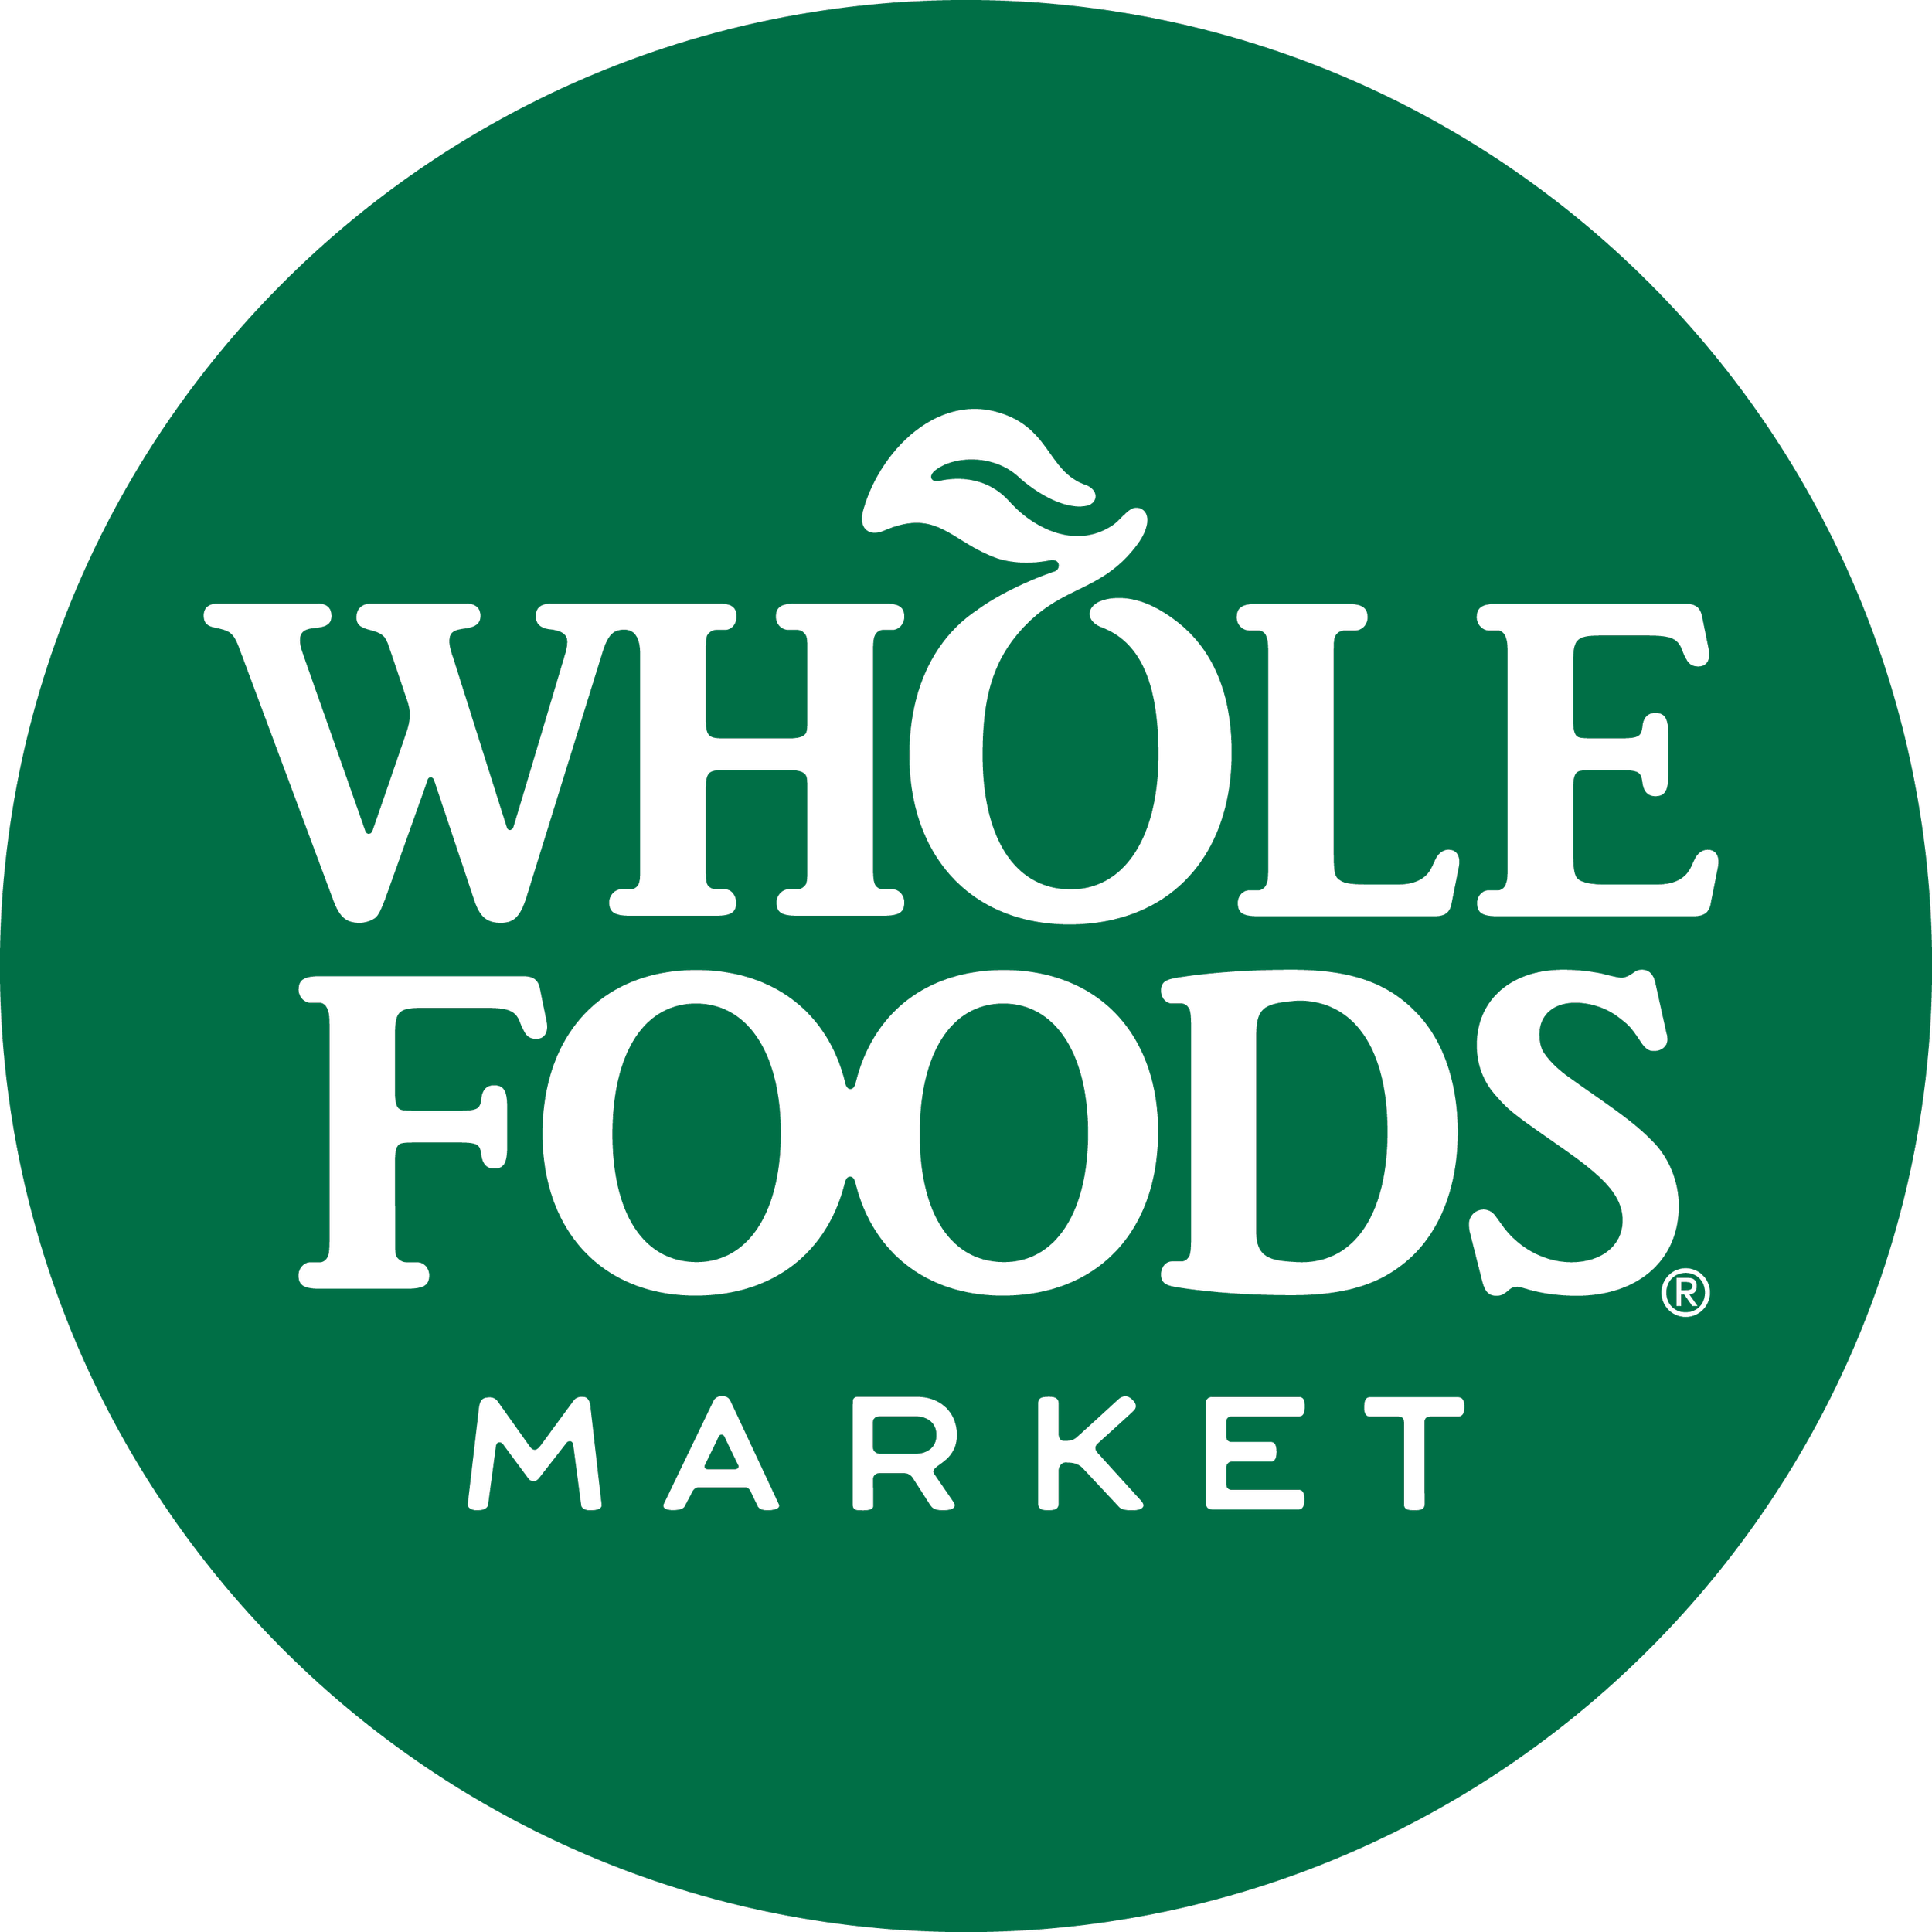 Whole_Foods_Market_201x_logo.png